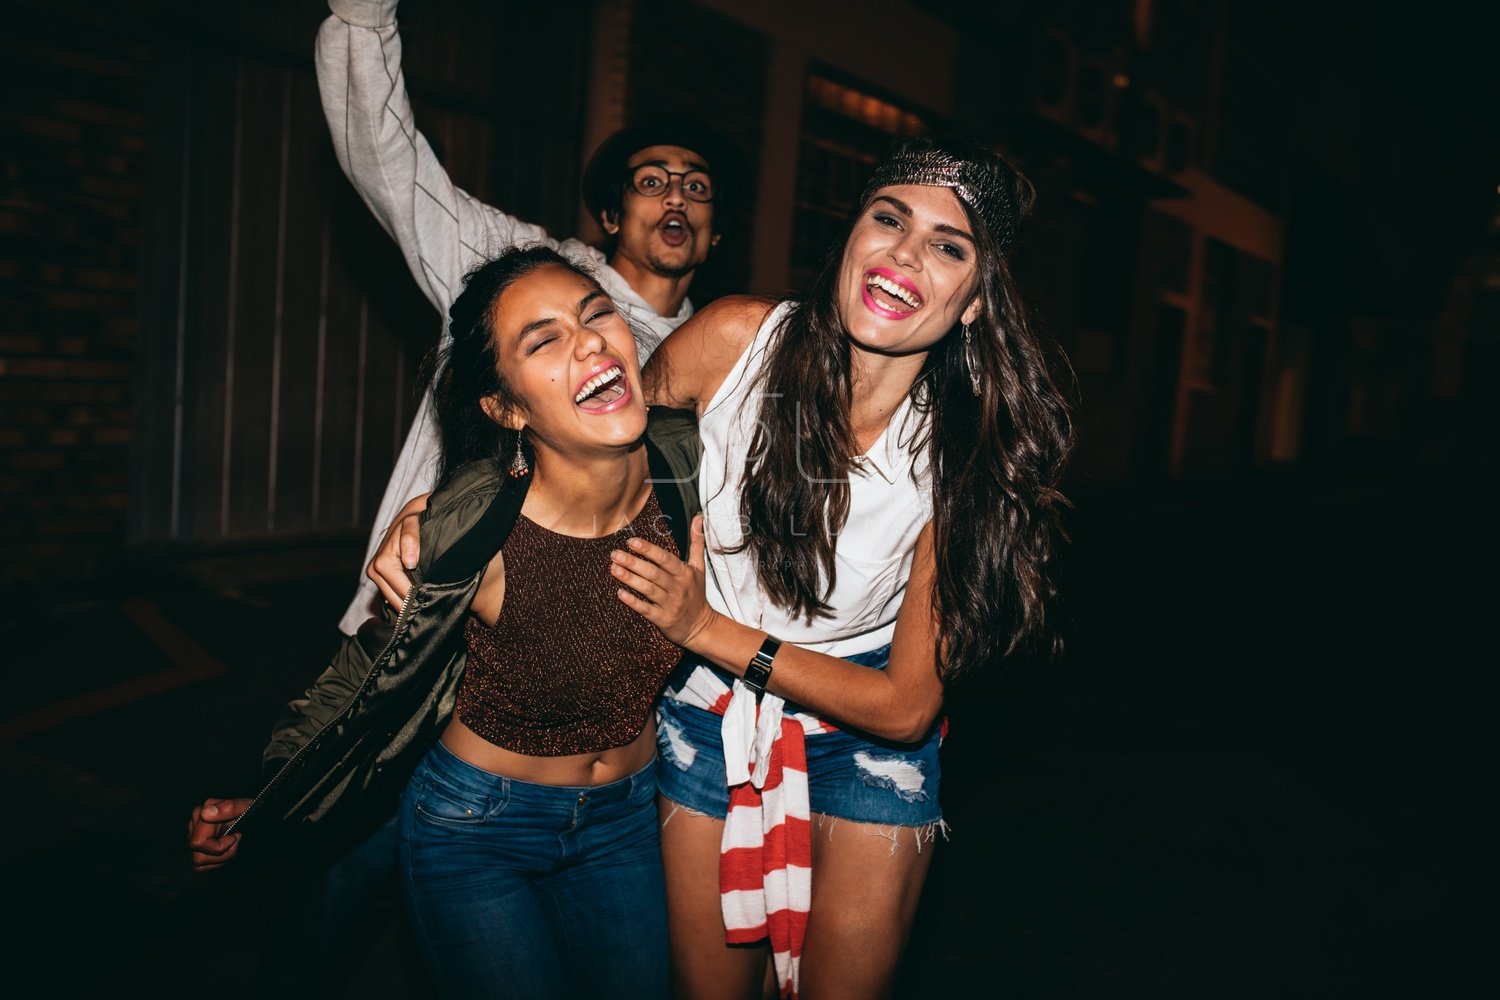 Best friends hanging out at night – Jacob Lund Photography Store